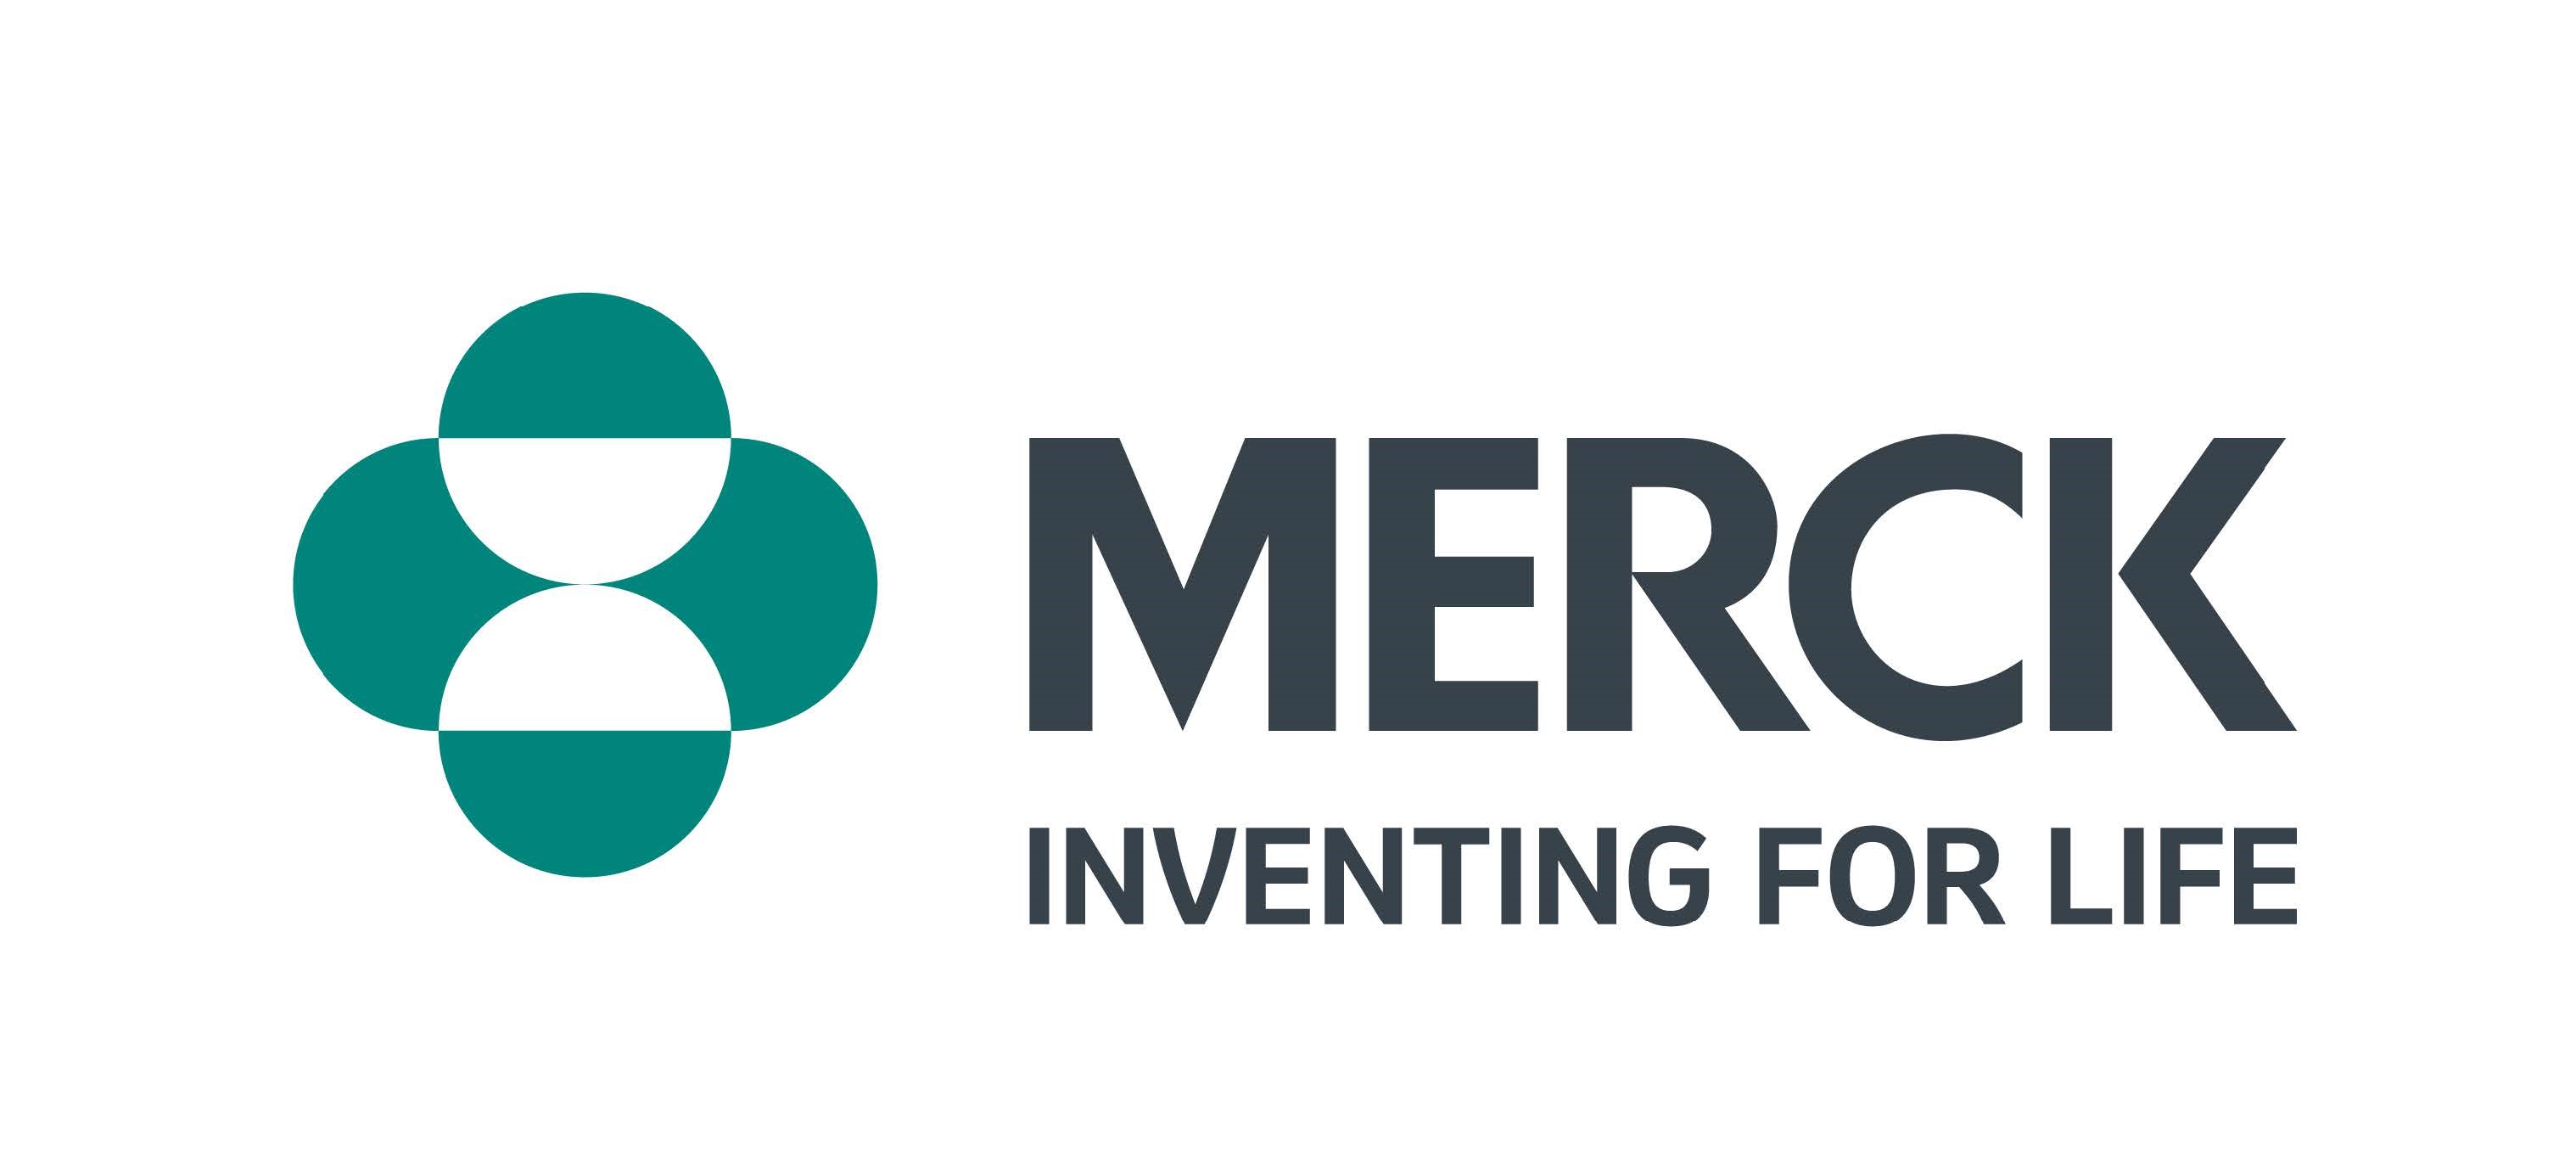 Company logo of hourglass with text 'Merck Inventing for Life'